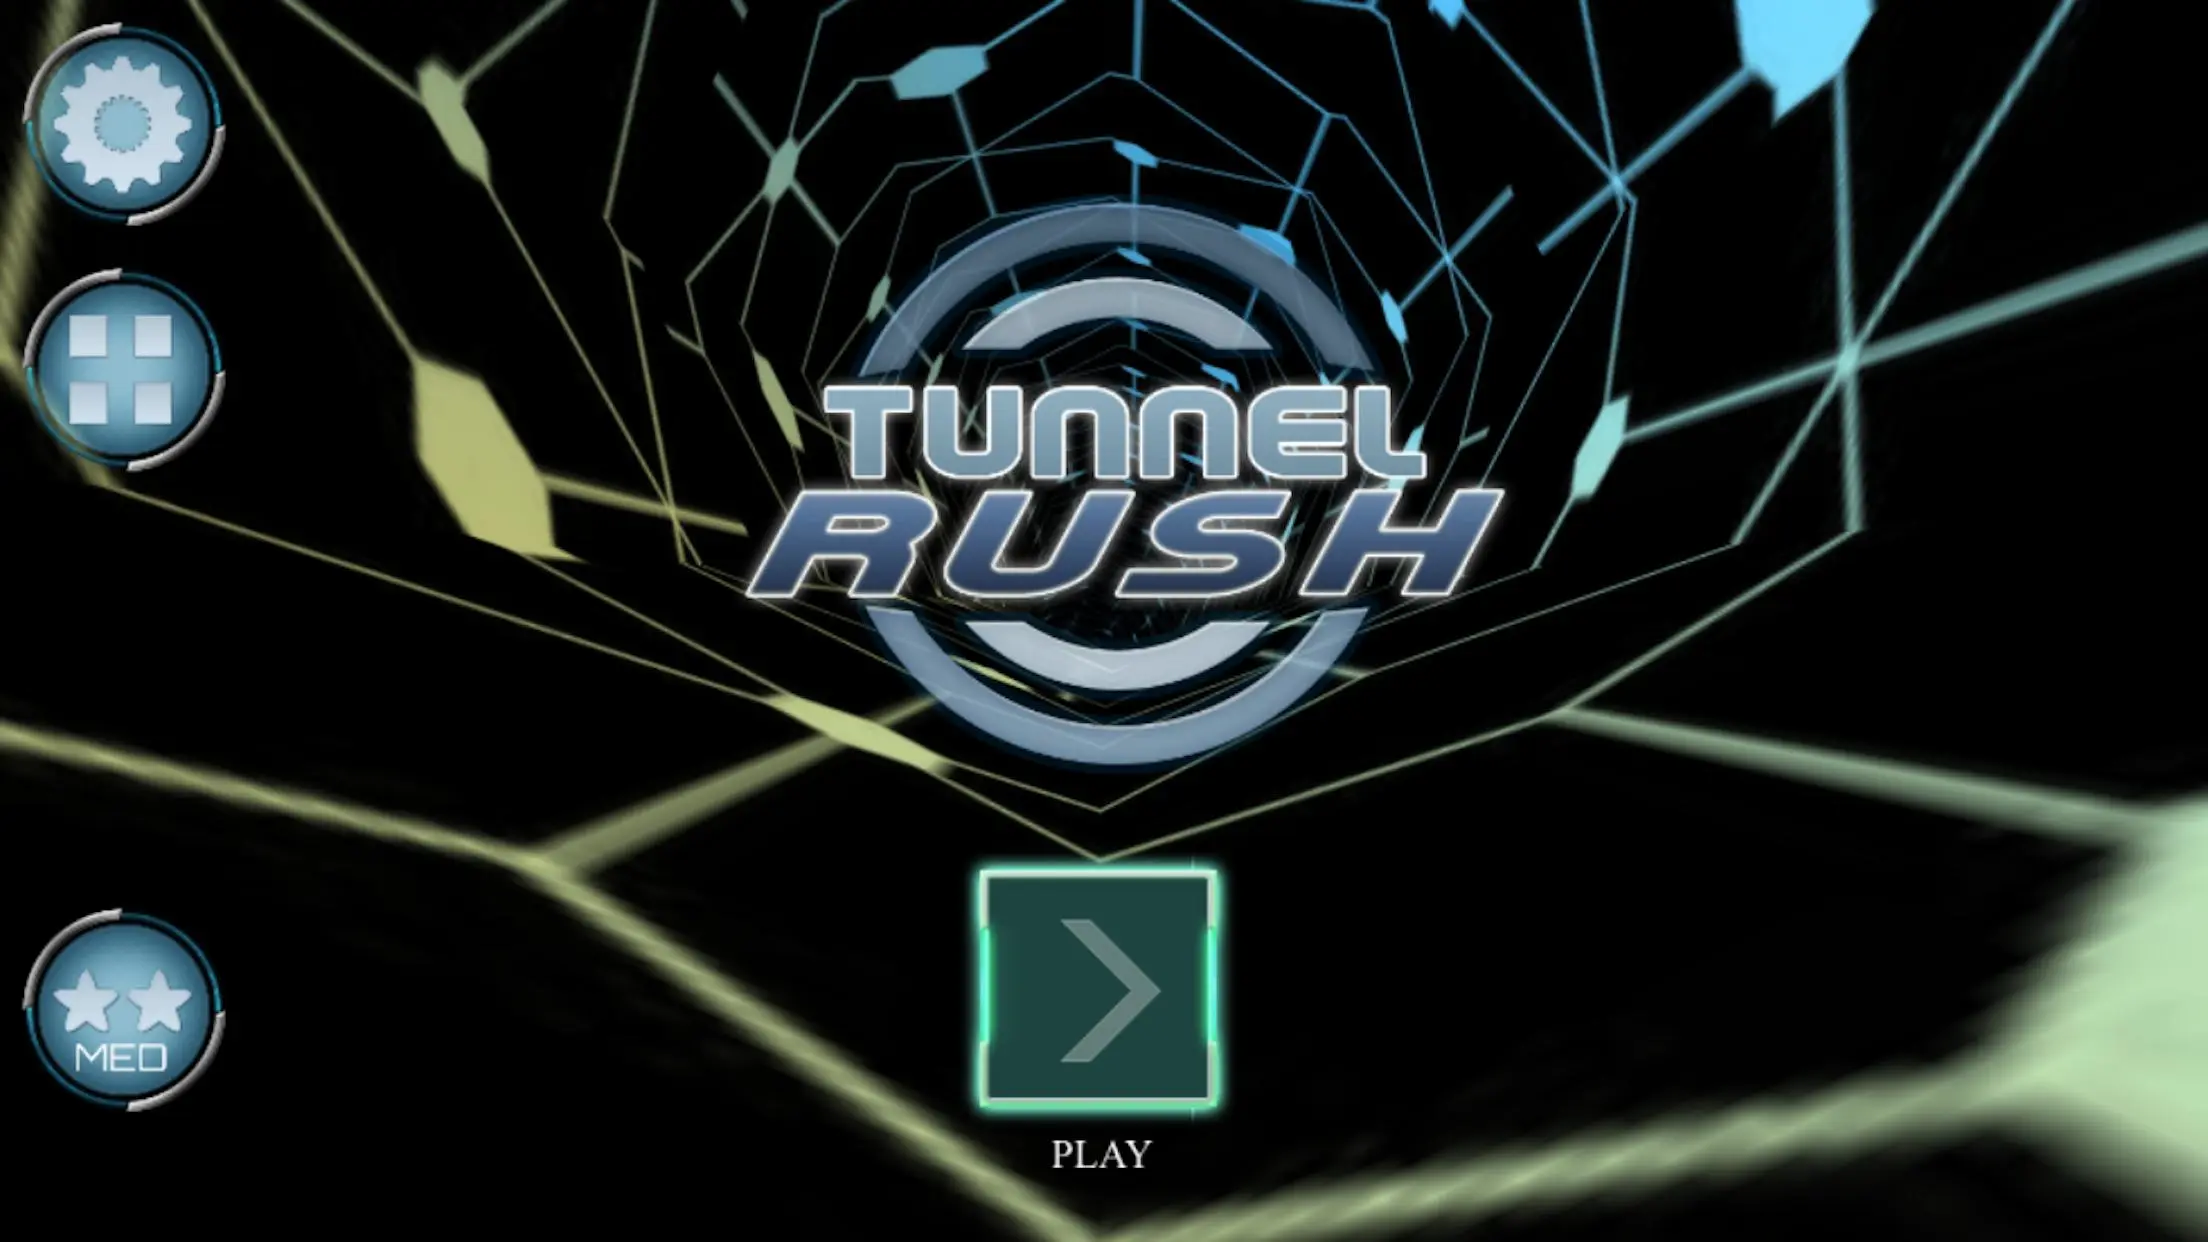 TUNNEL RUSH 2 - Play Online for Free!